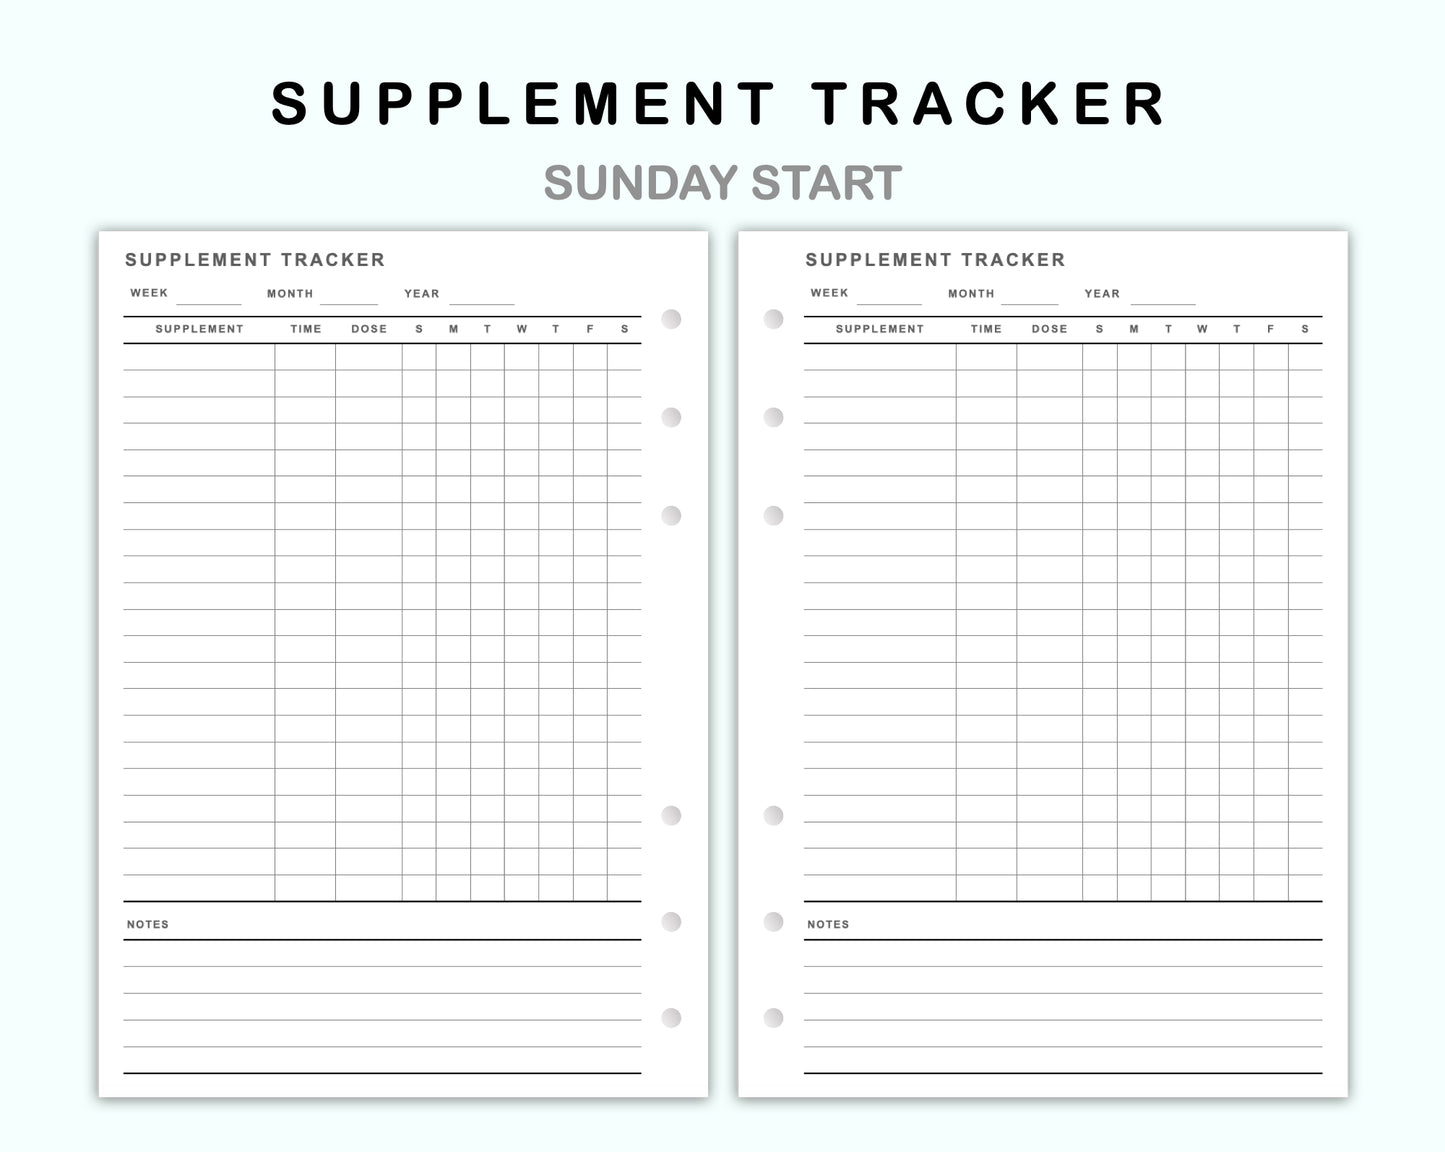 Personal Wide Inserts - Supplement Tracker